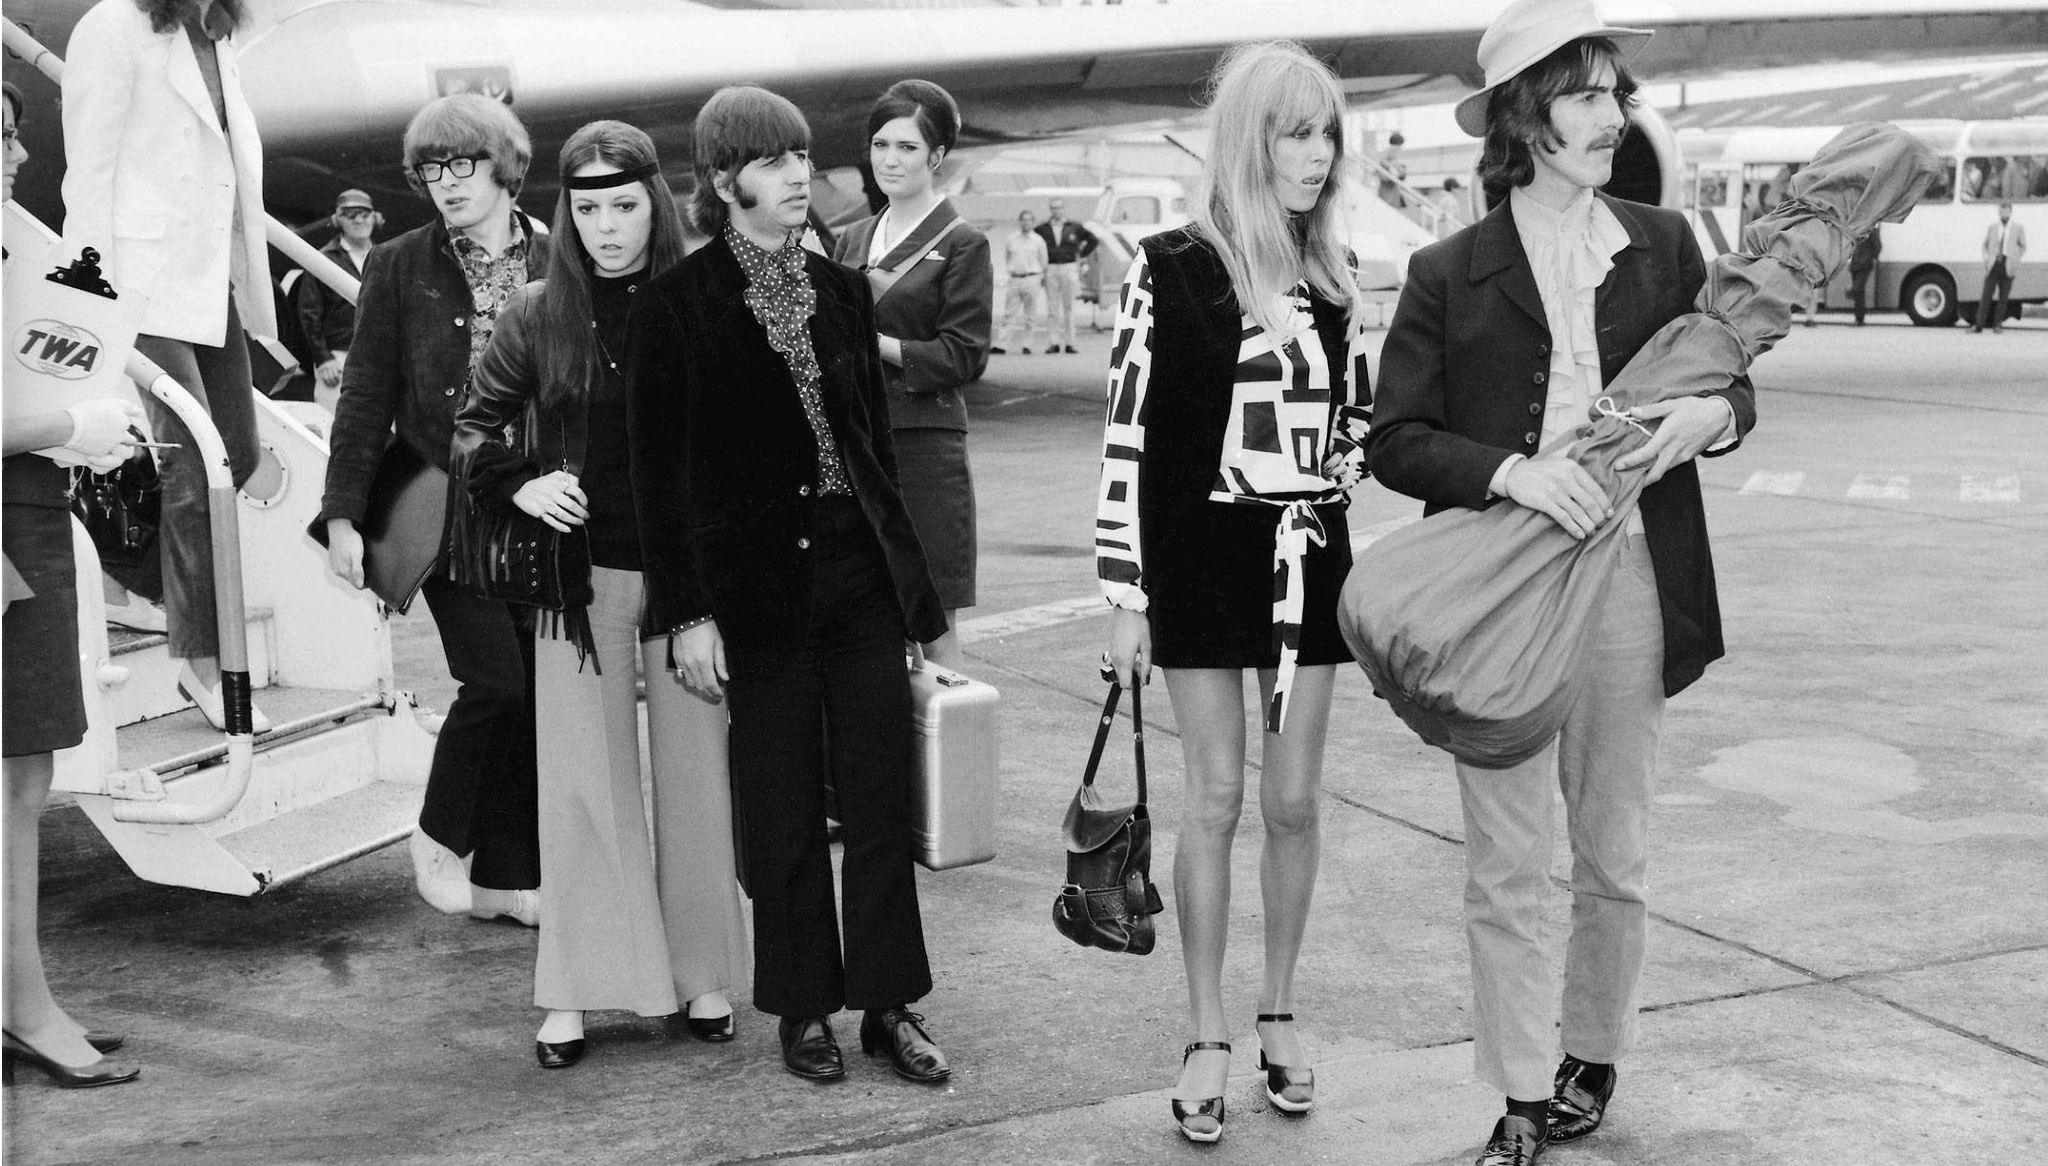 Peter Asher, Maureen and Ringo Starr, Pattie and George Harrison getting off a plane in London in 1968